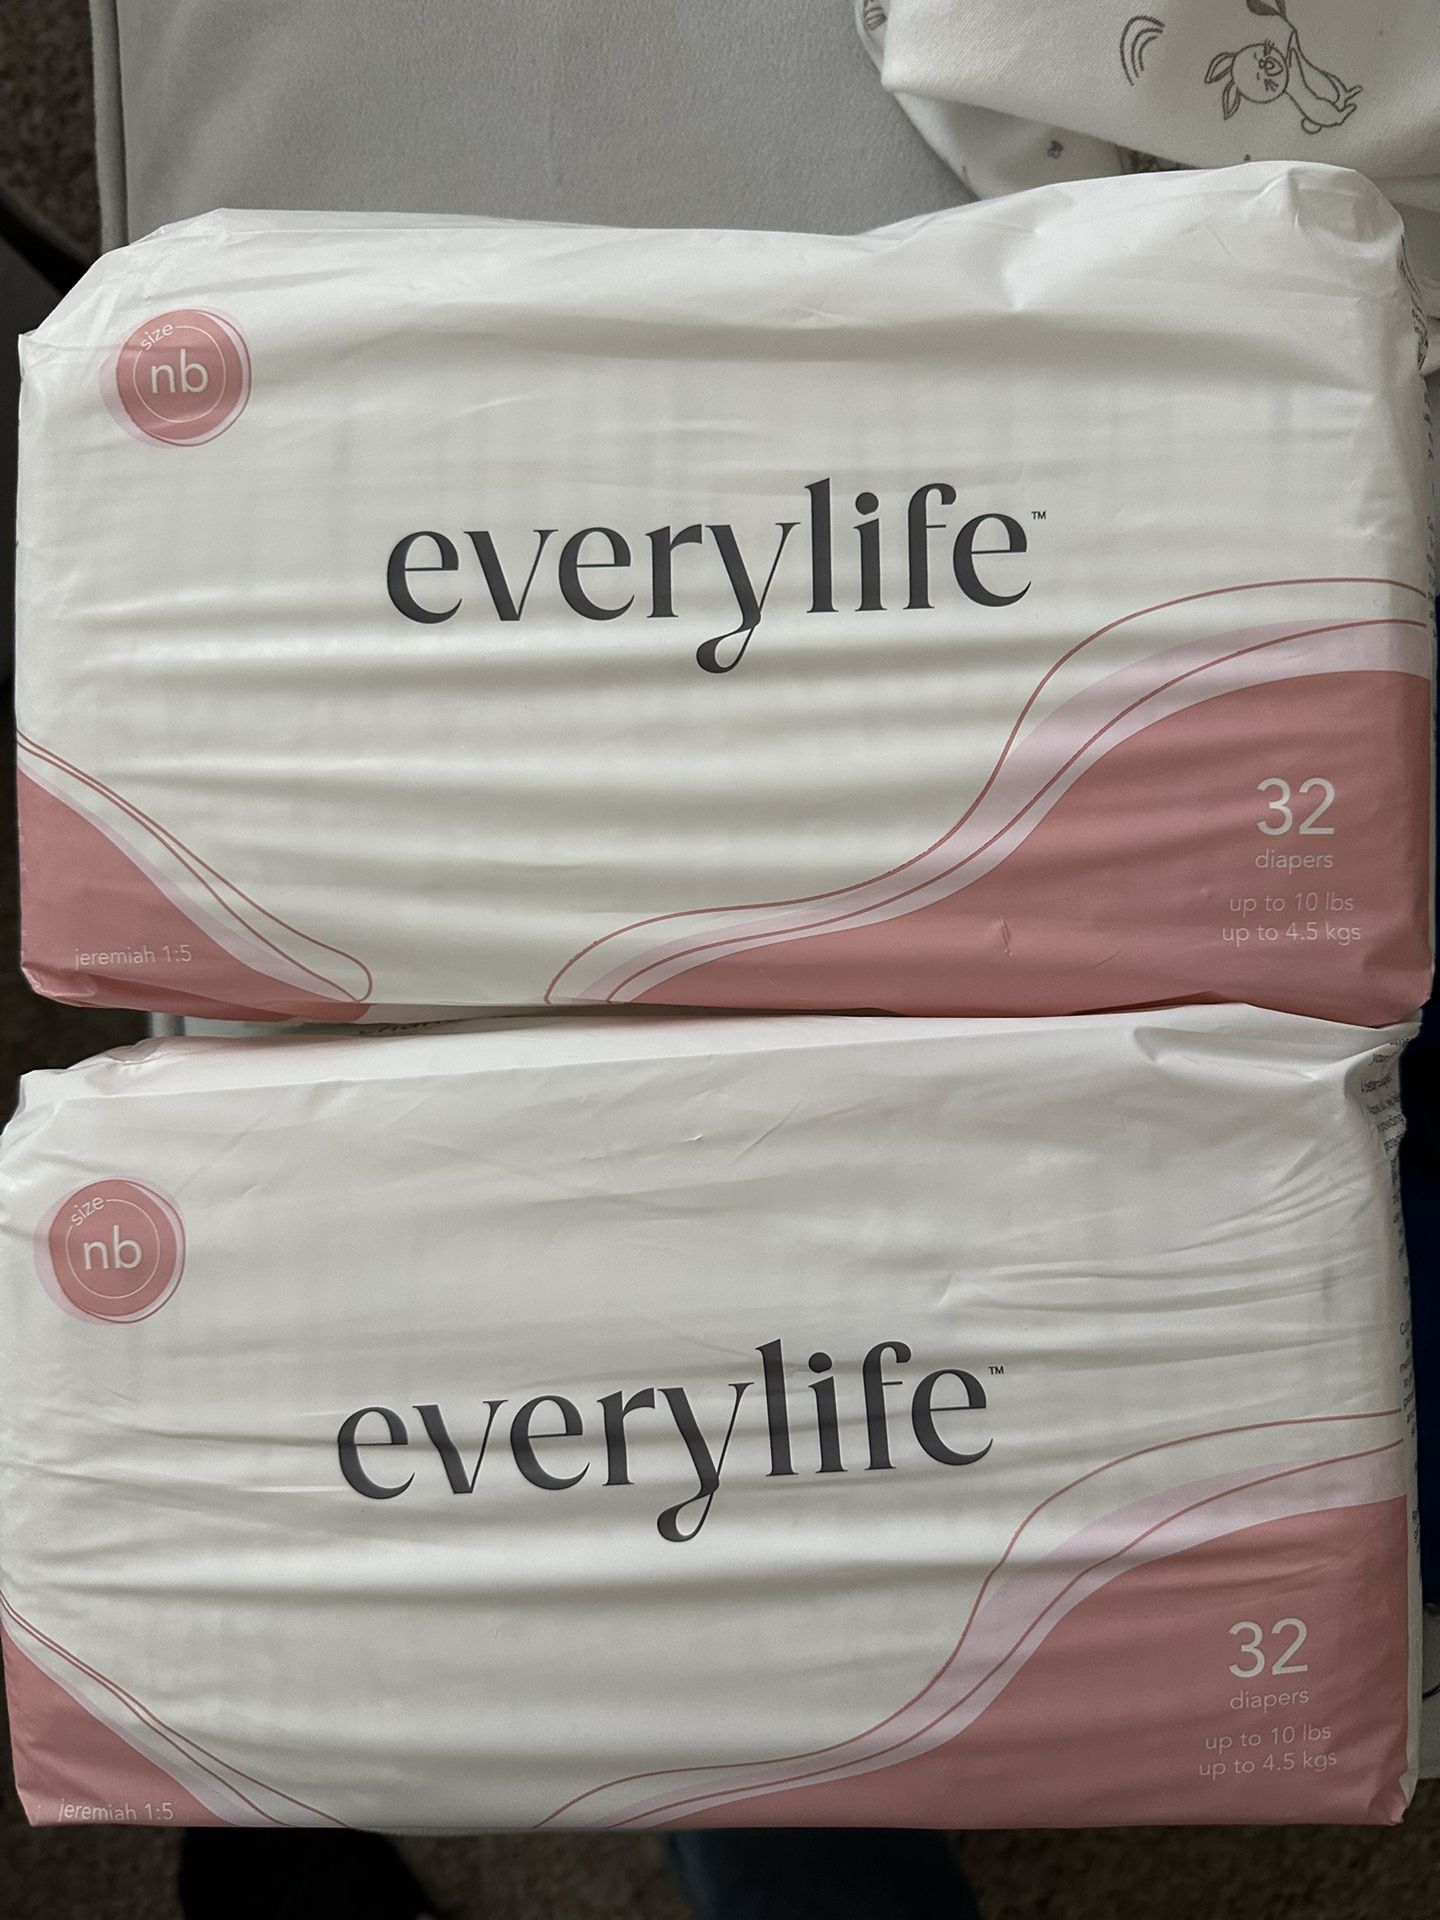 EveryLife Diapers